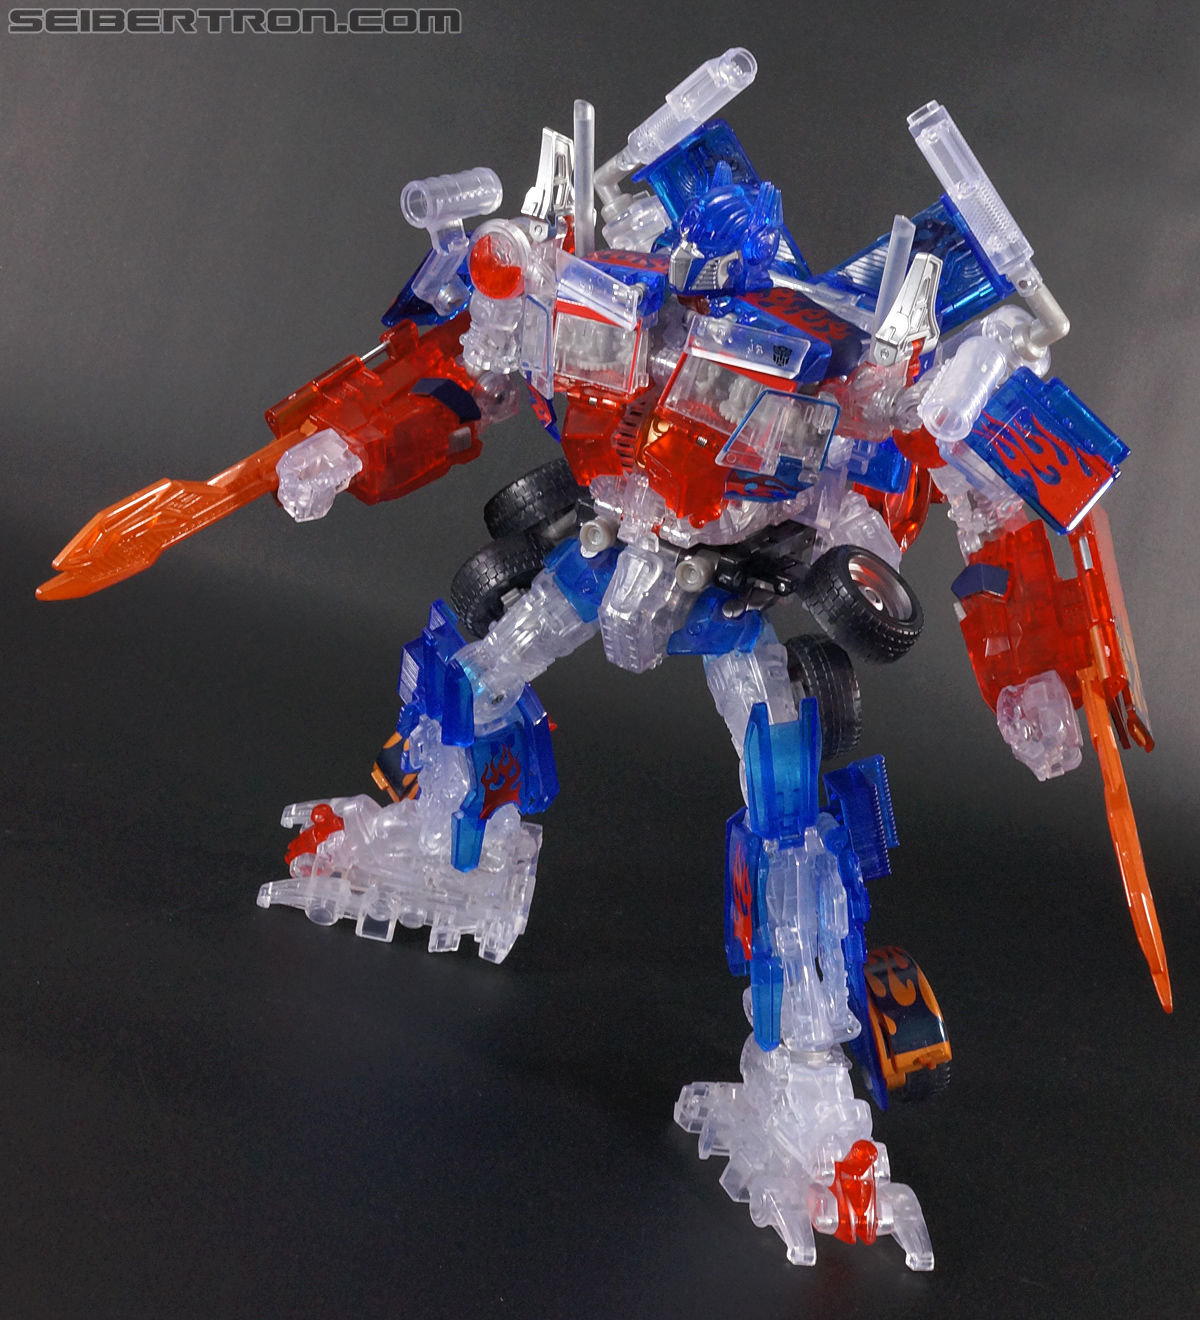 Transformers Revenge of the Fallen Optimus Prime Limited Clear Color Edition (Image #88 of 125)